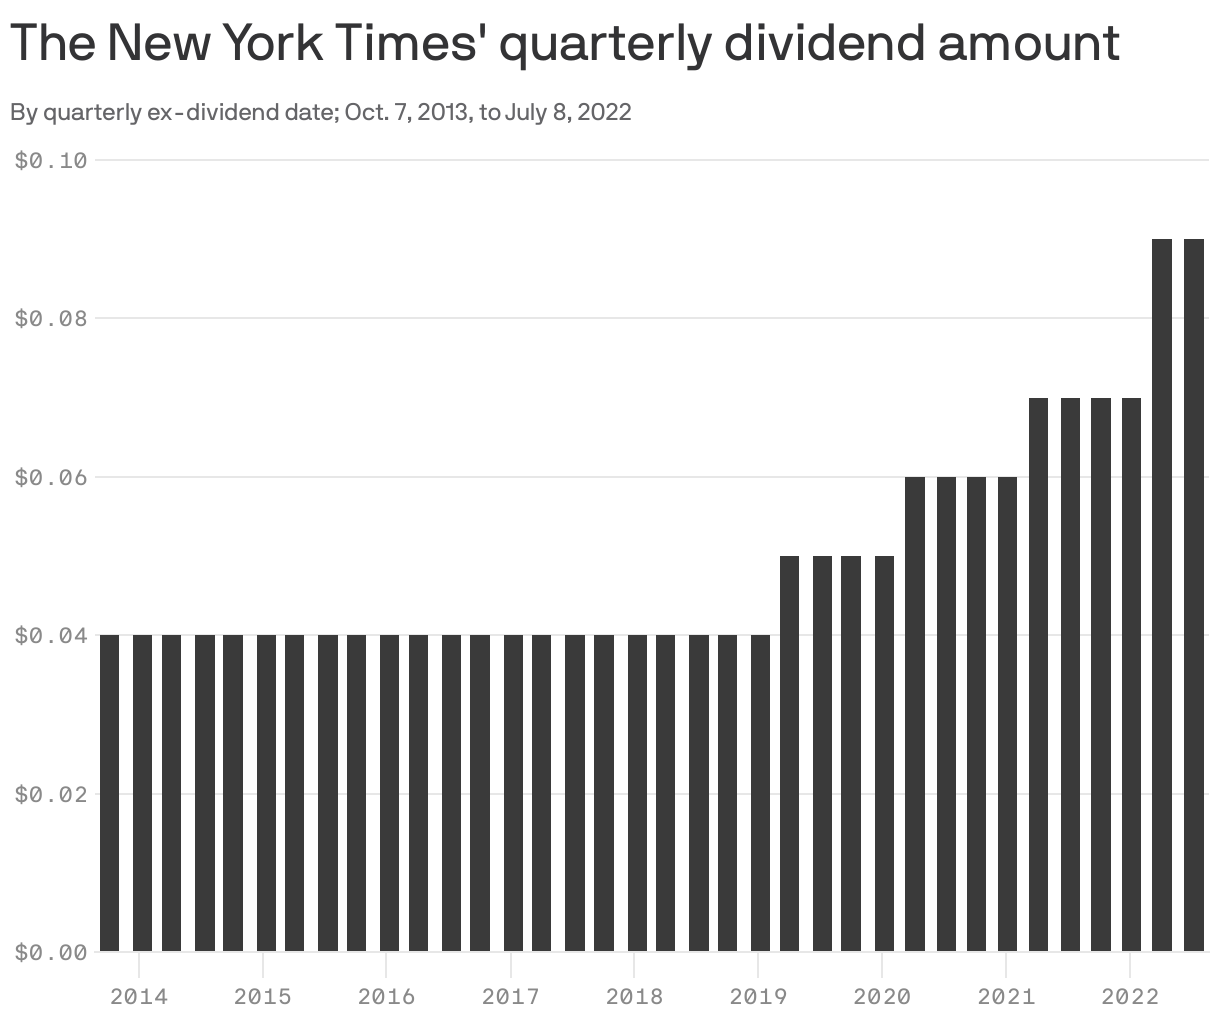 The New York Times' quarterly dividend amount